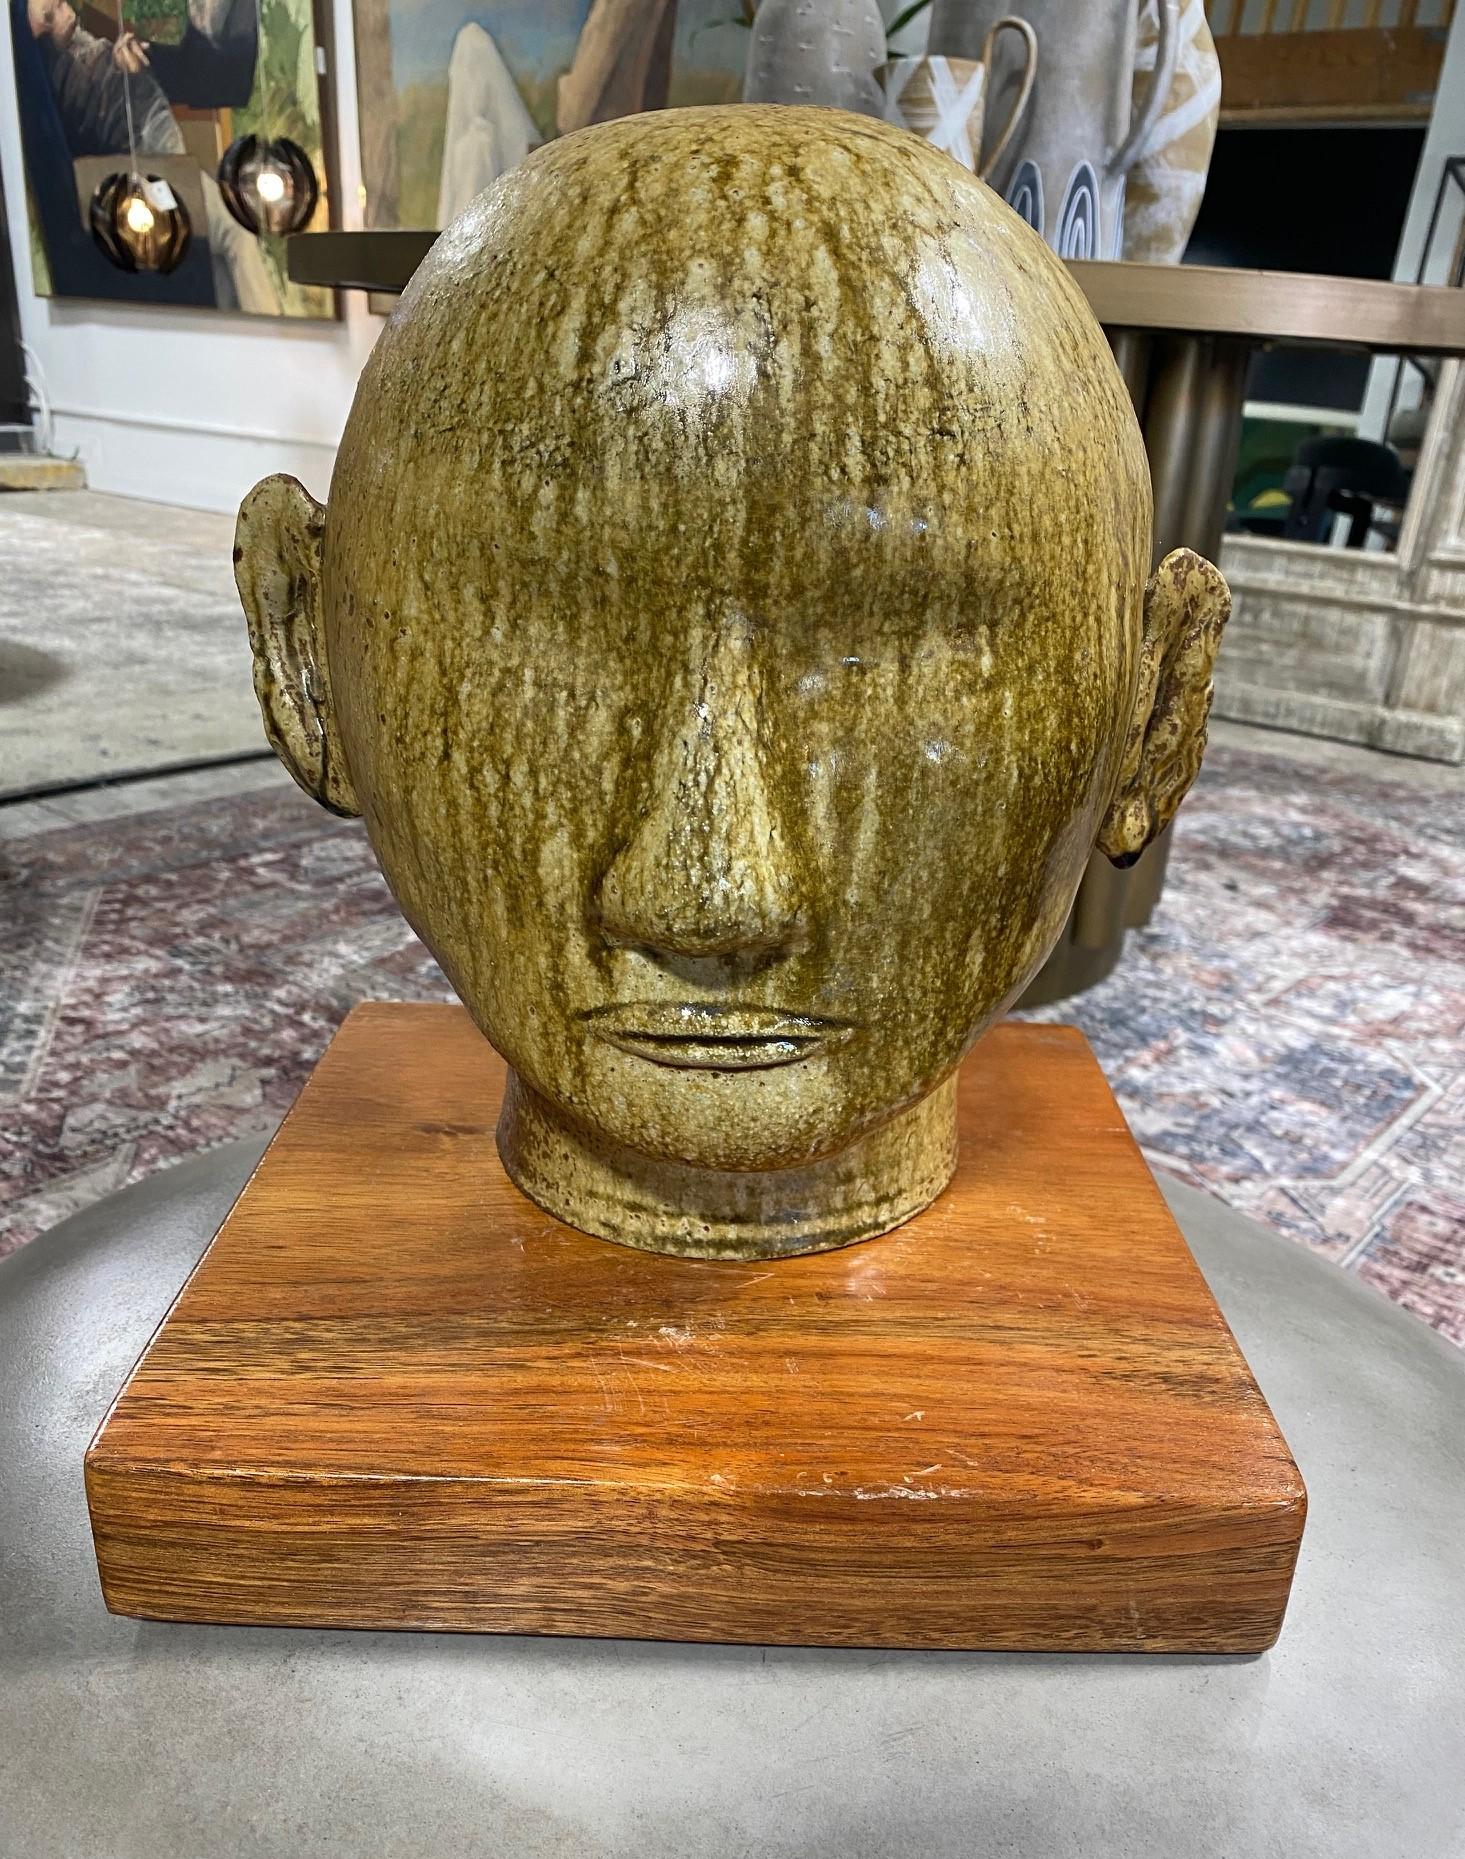 A truly wonderful, one of a kind, unique artisan Buddha head sculpture beautifully drip glazed with Fall shades of green, brown and yellow colours. The Buddha's eyes appear closed in serene meditation. 

This piece caught our eye straight away.